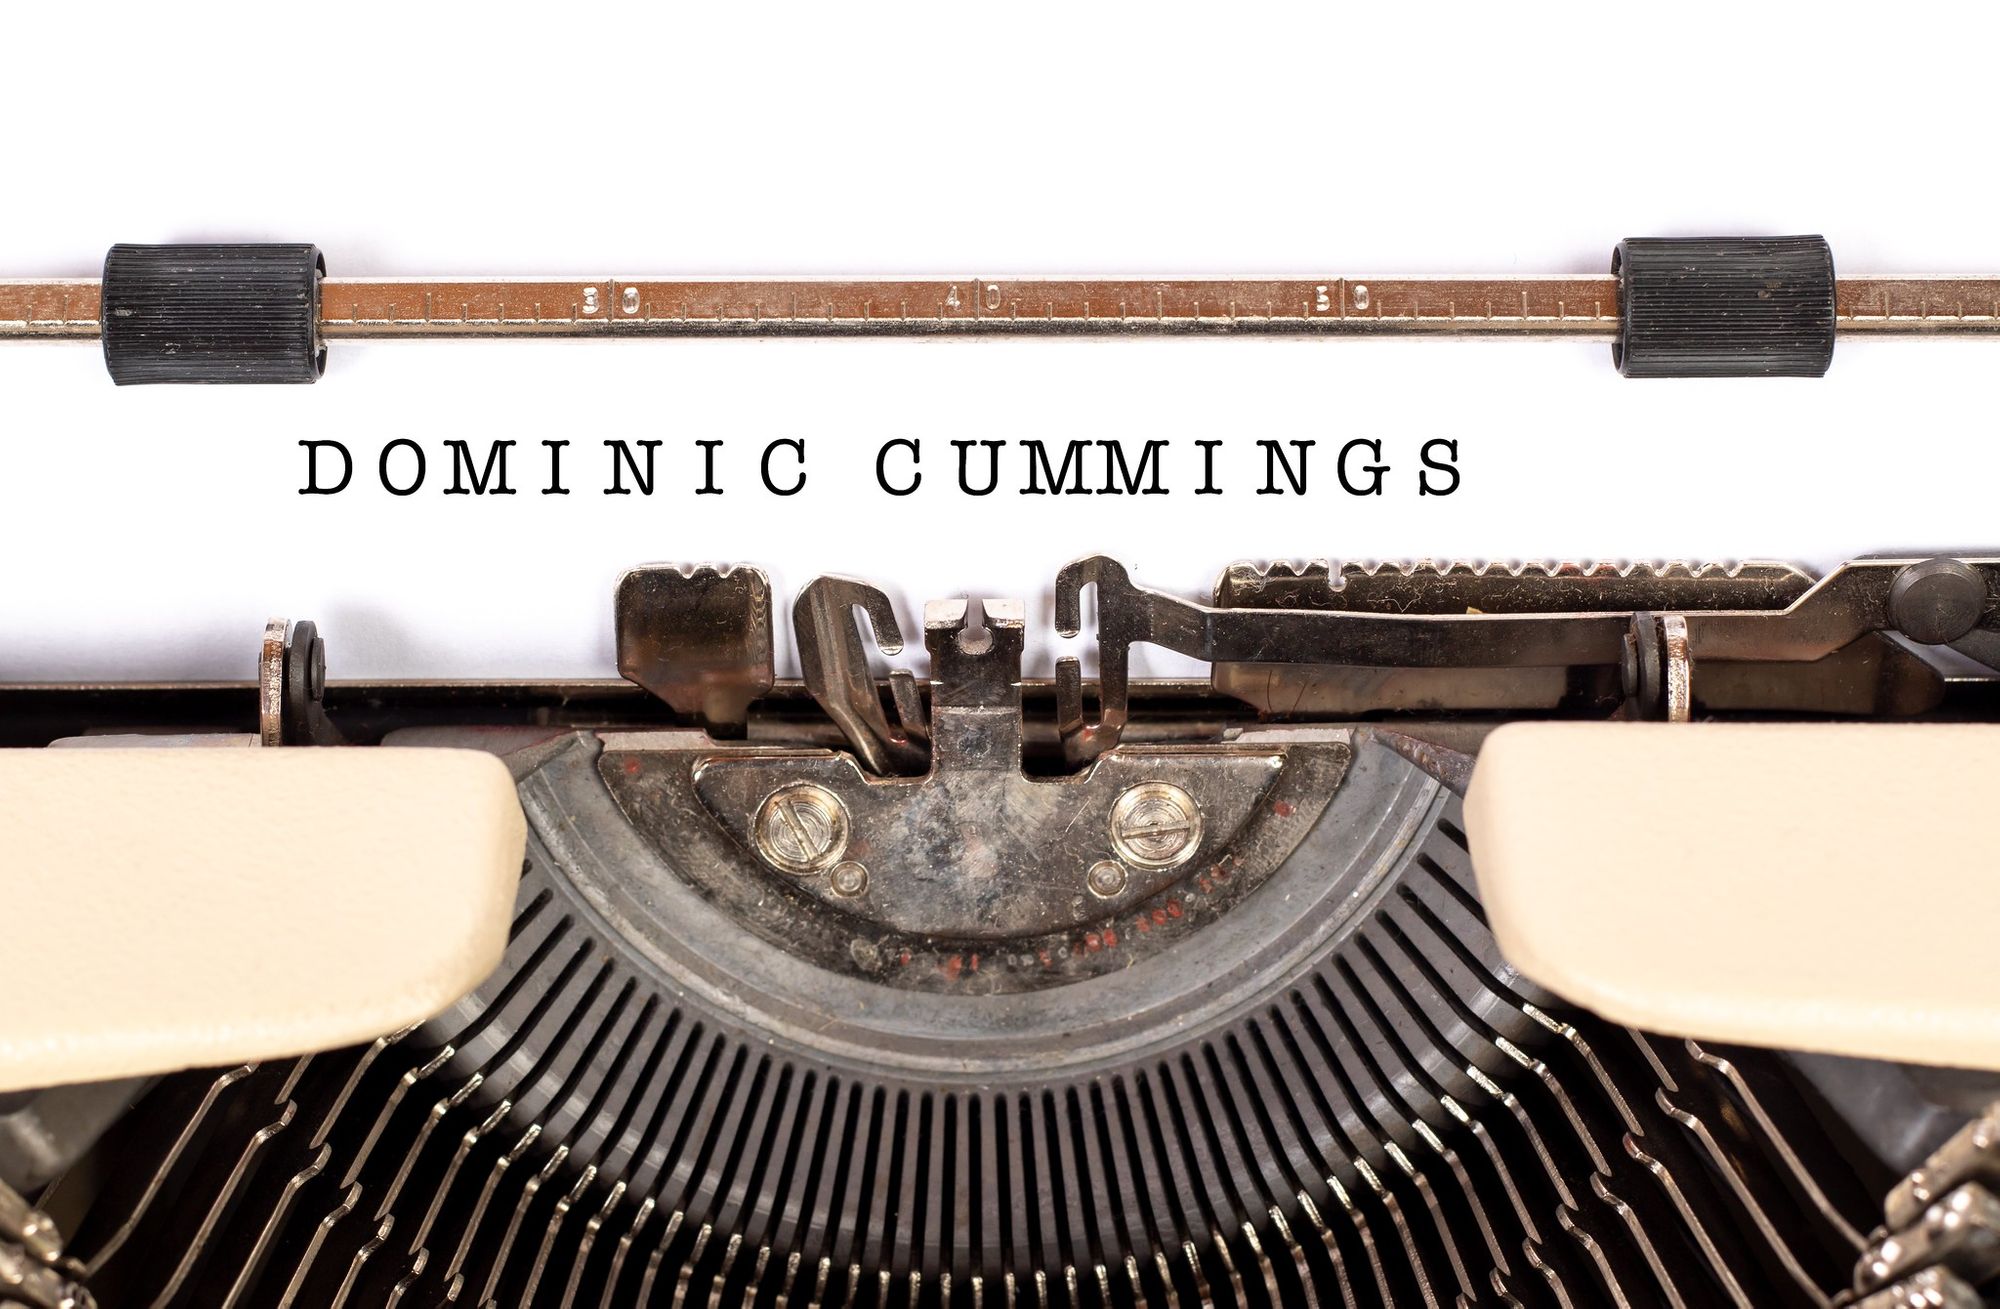 Dominic Cummings’ blogpost, direct dialogue and its threat to mainstream political journalism